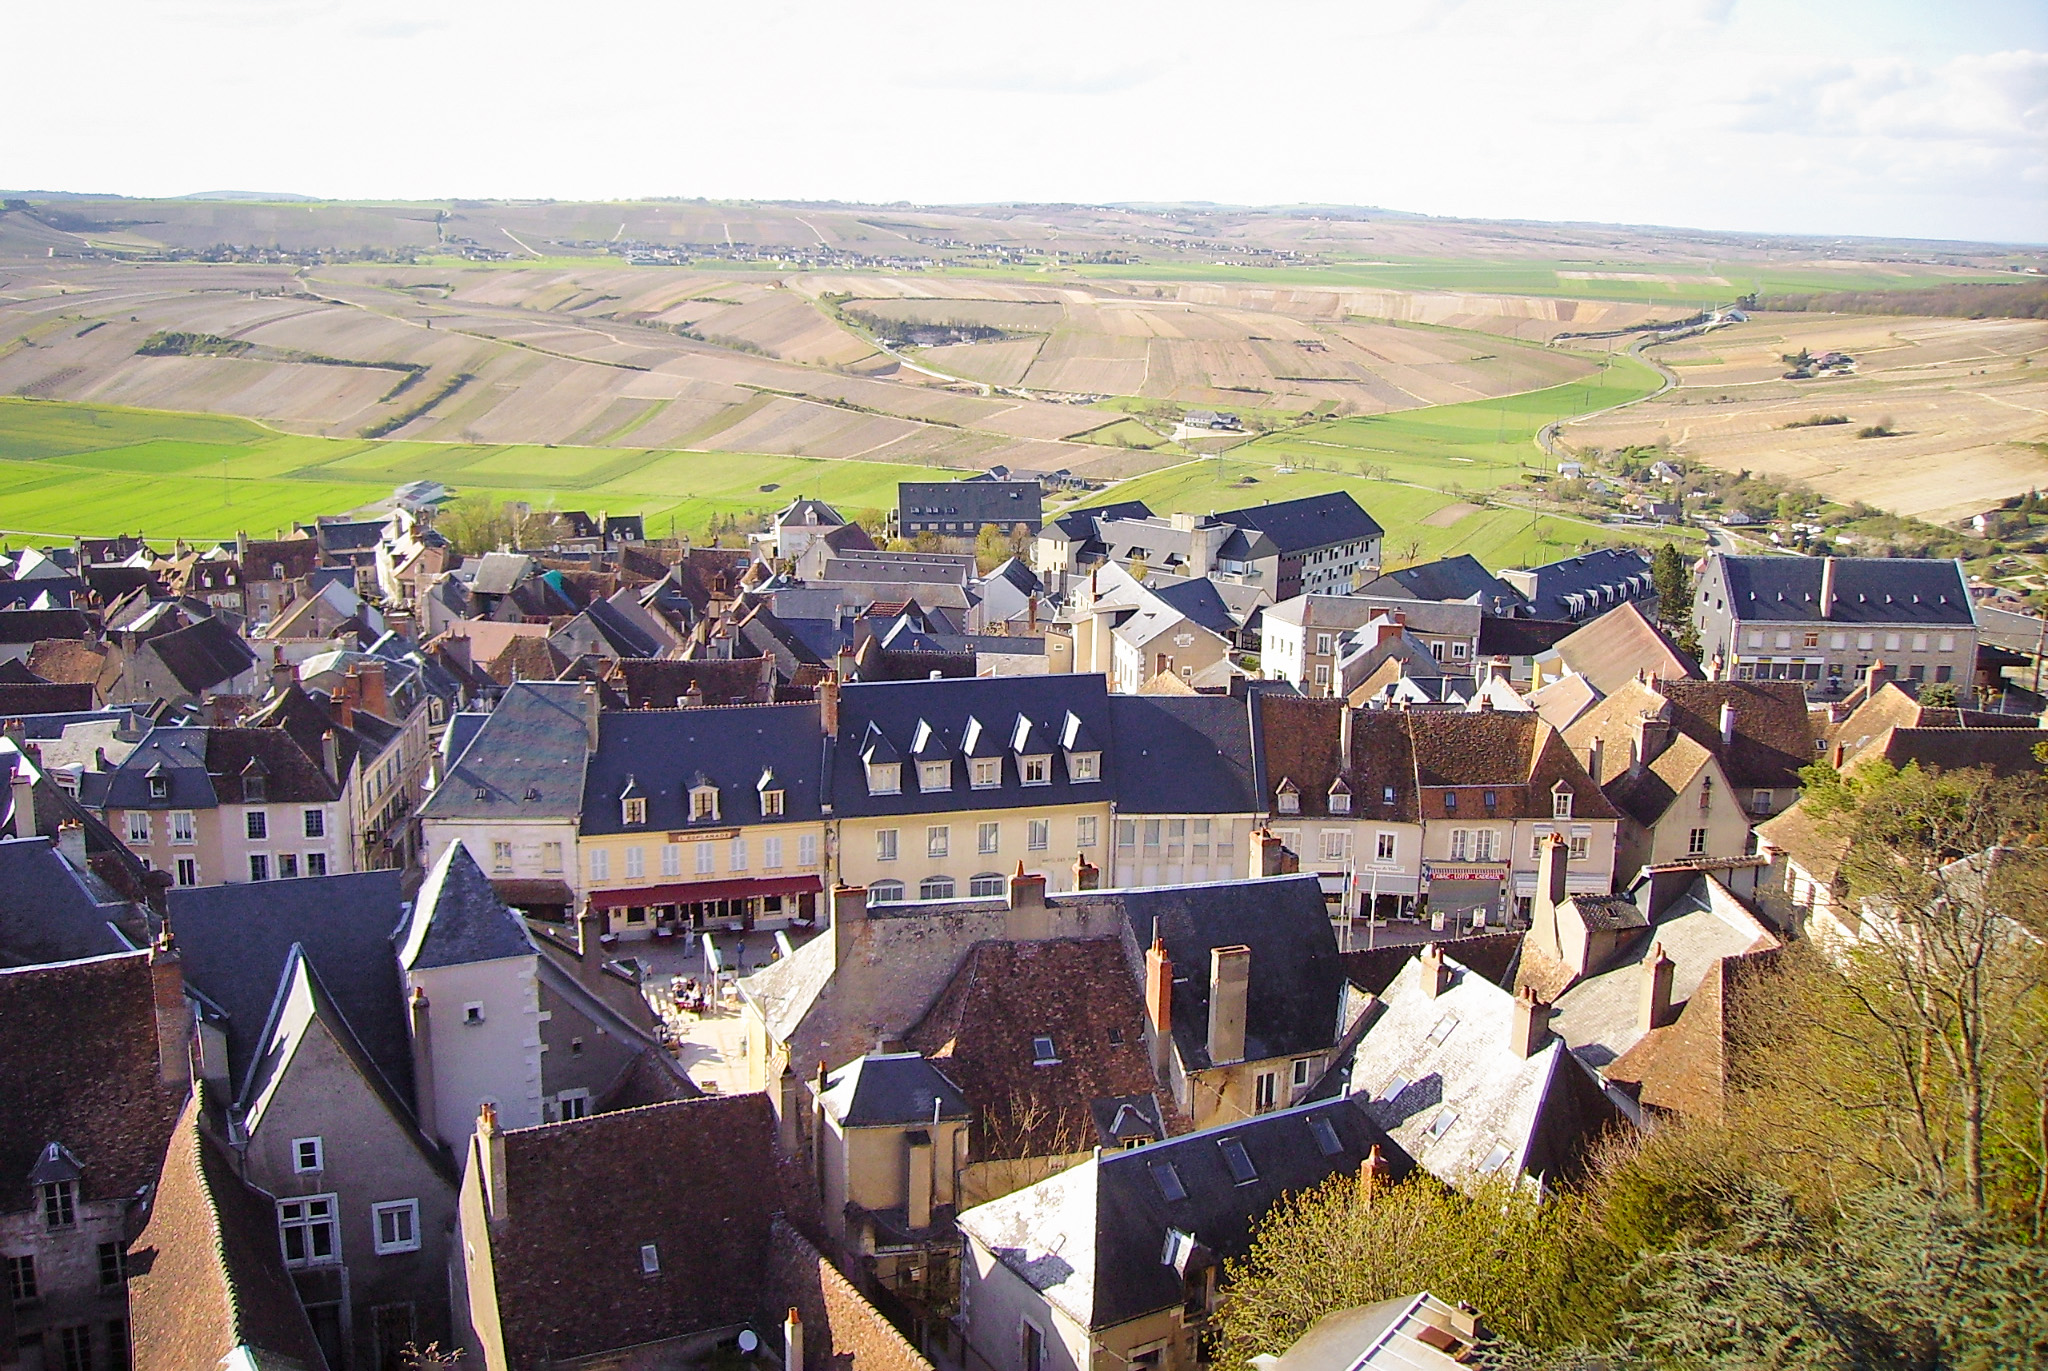 Villages in France - Sancerre © Cjp24 - licence [CC BY-SA 4.0] from Wikimedia Commons